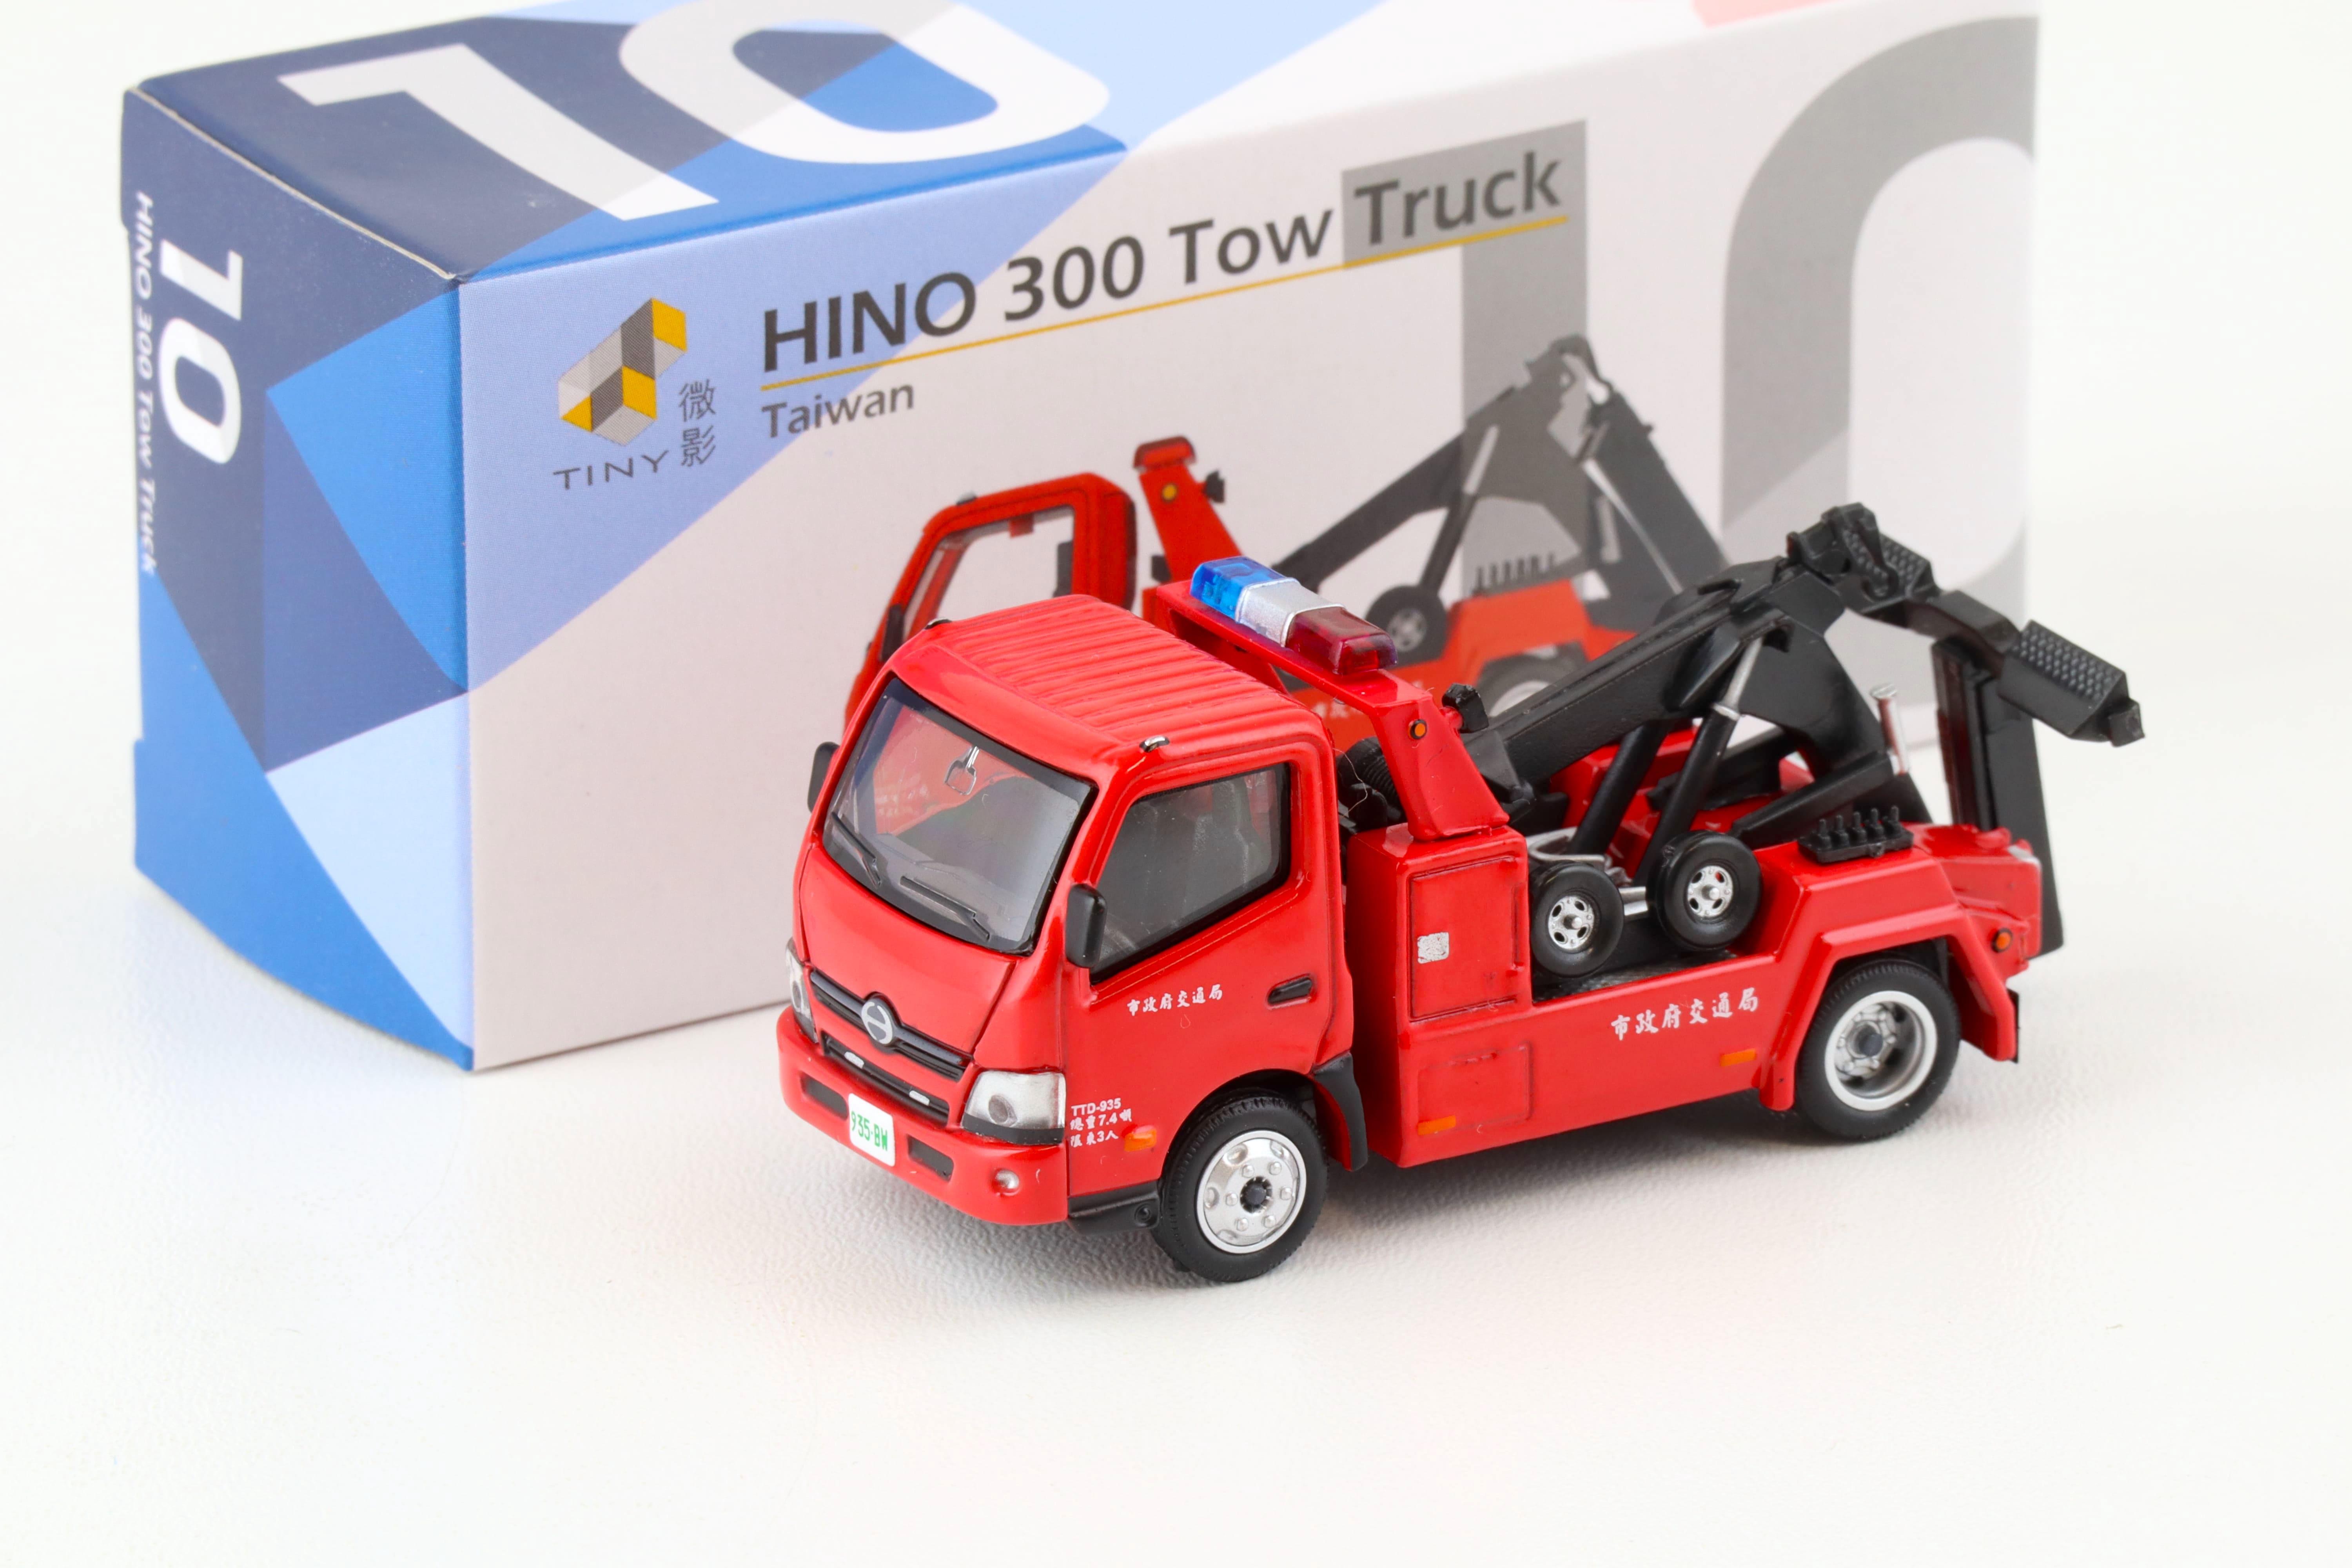 1:64 TINY HINO 300 Tow Truck Abschlepper Taiwan red